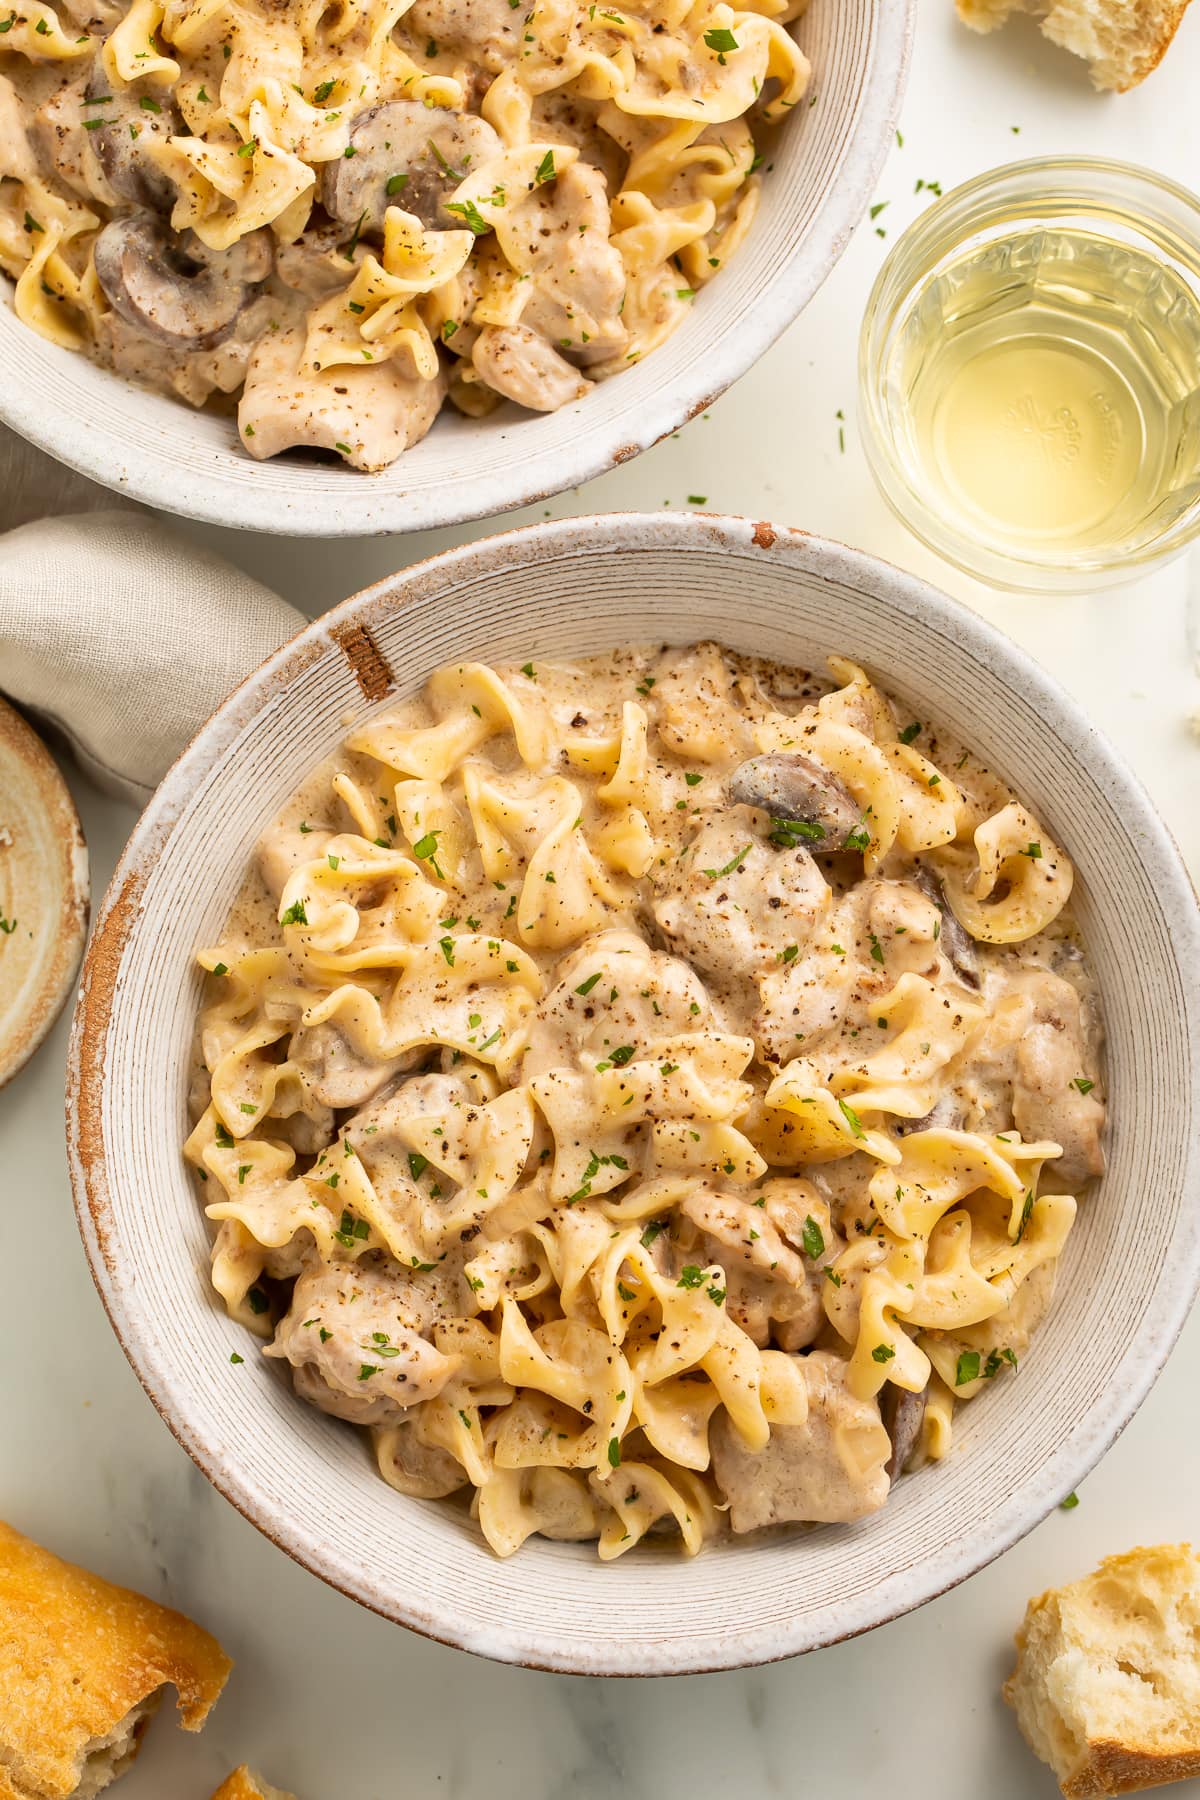 Chicken stroganoff plated in a large round bowl on a neutral table next to a cloth napkin.